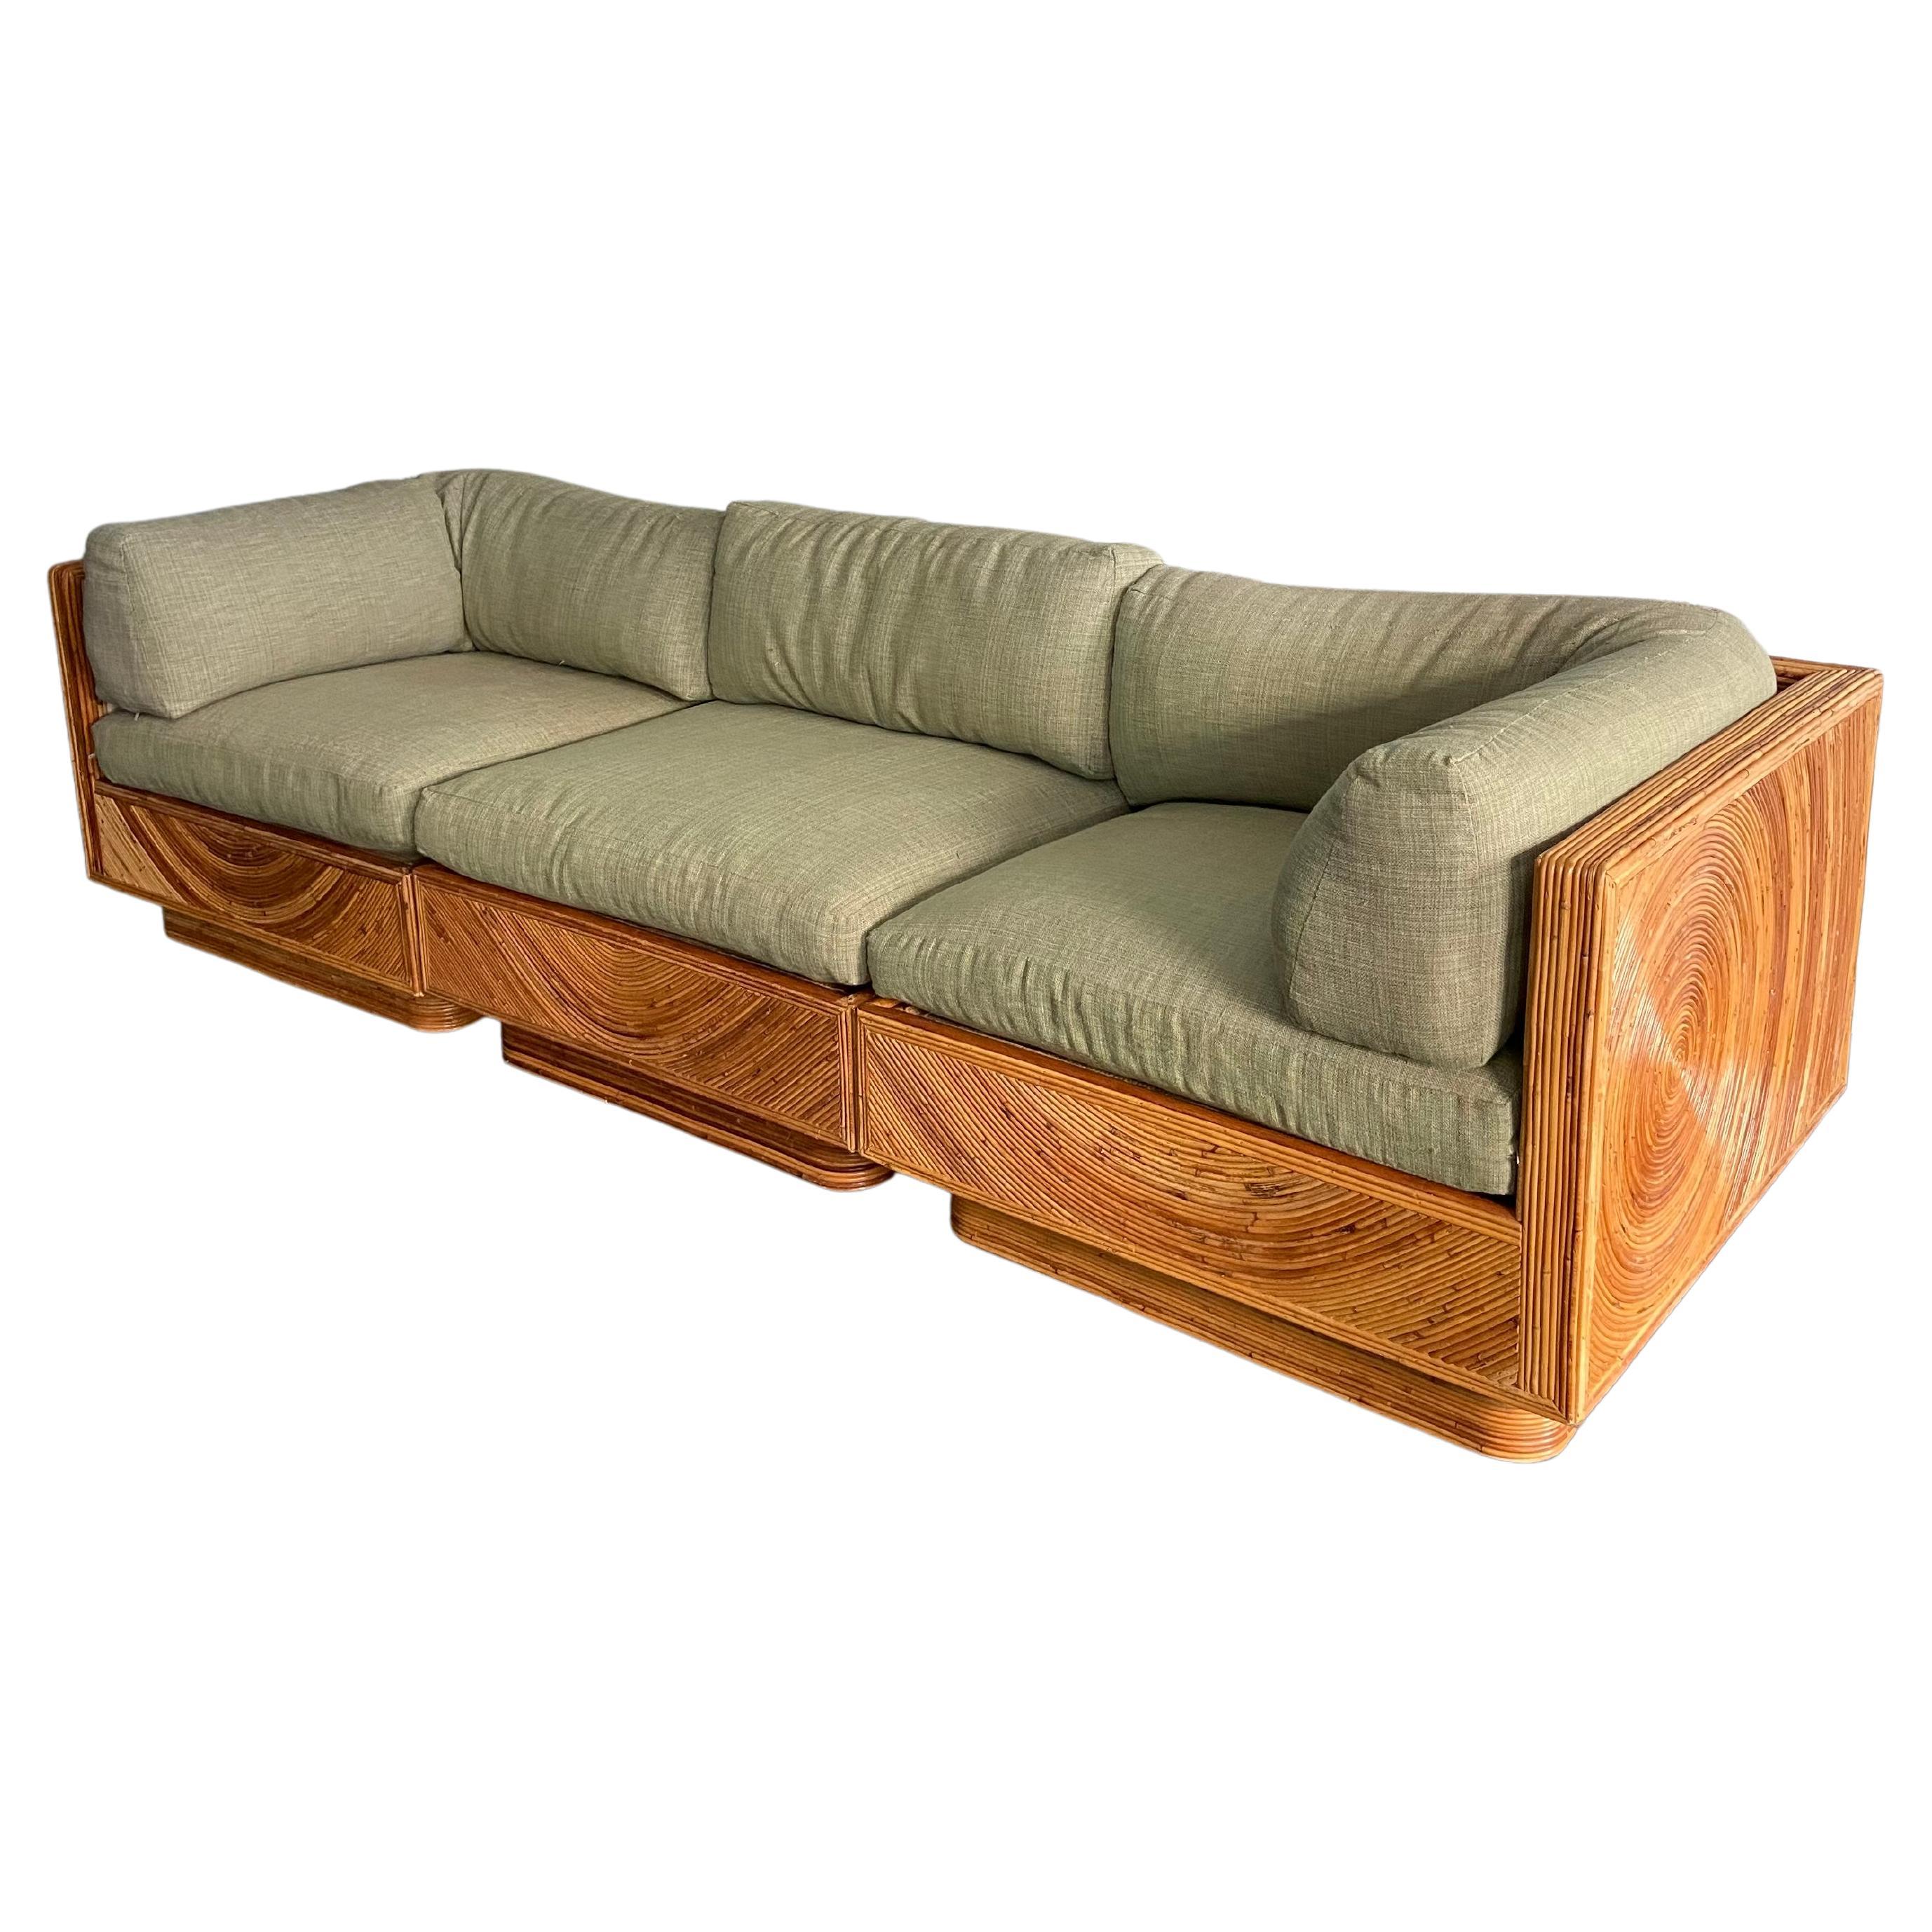 Adrian Pearsall for Comfort Designs Modular Pencil Reed Sofa